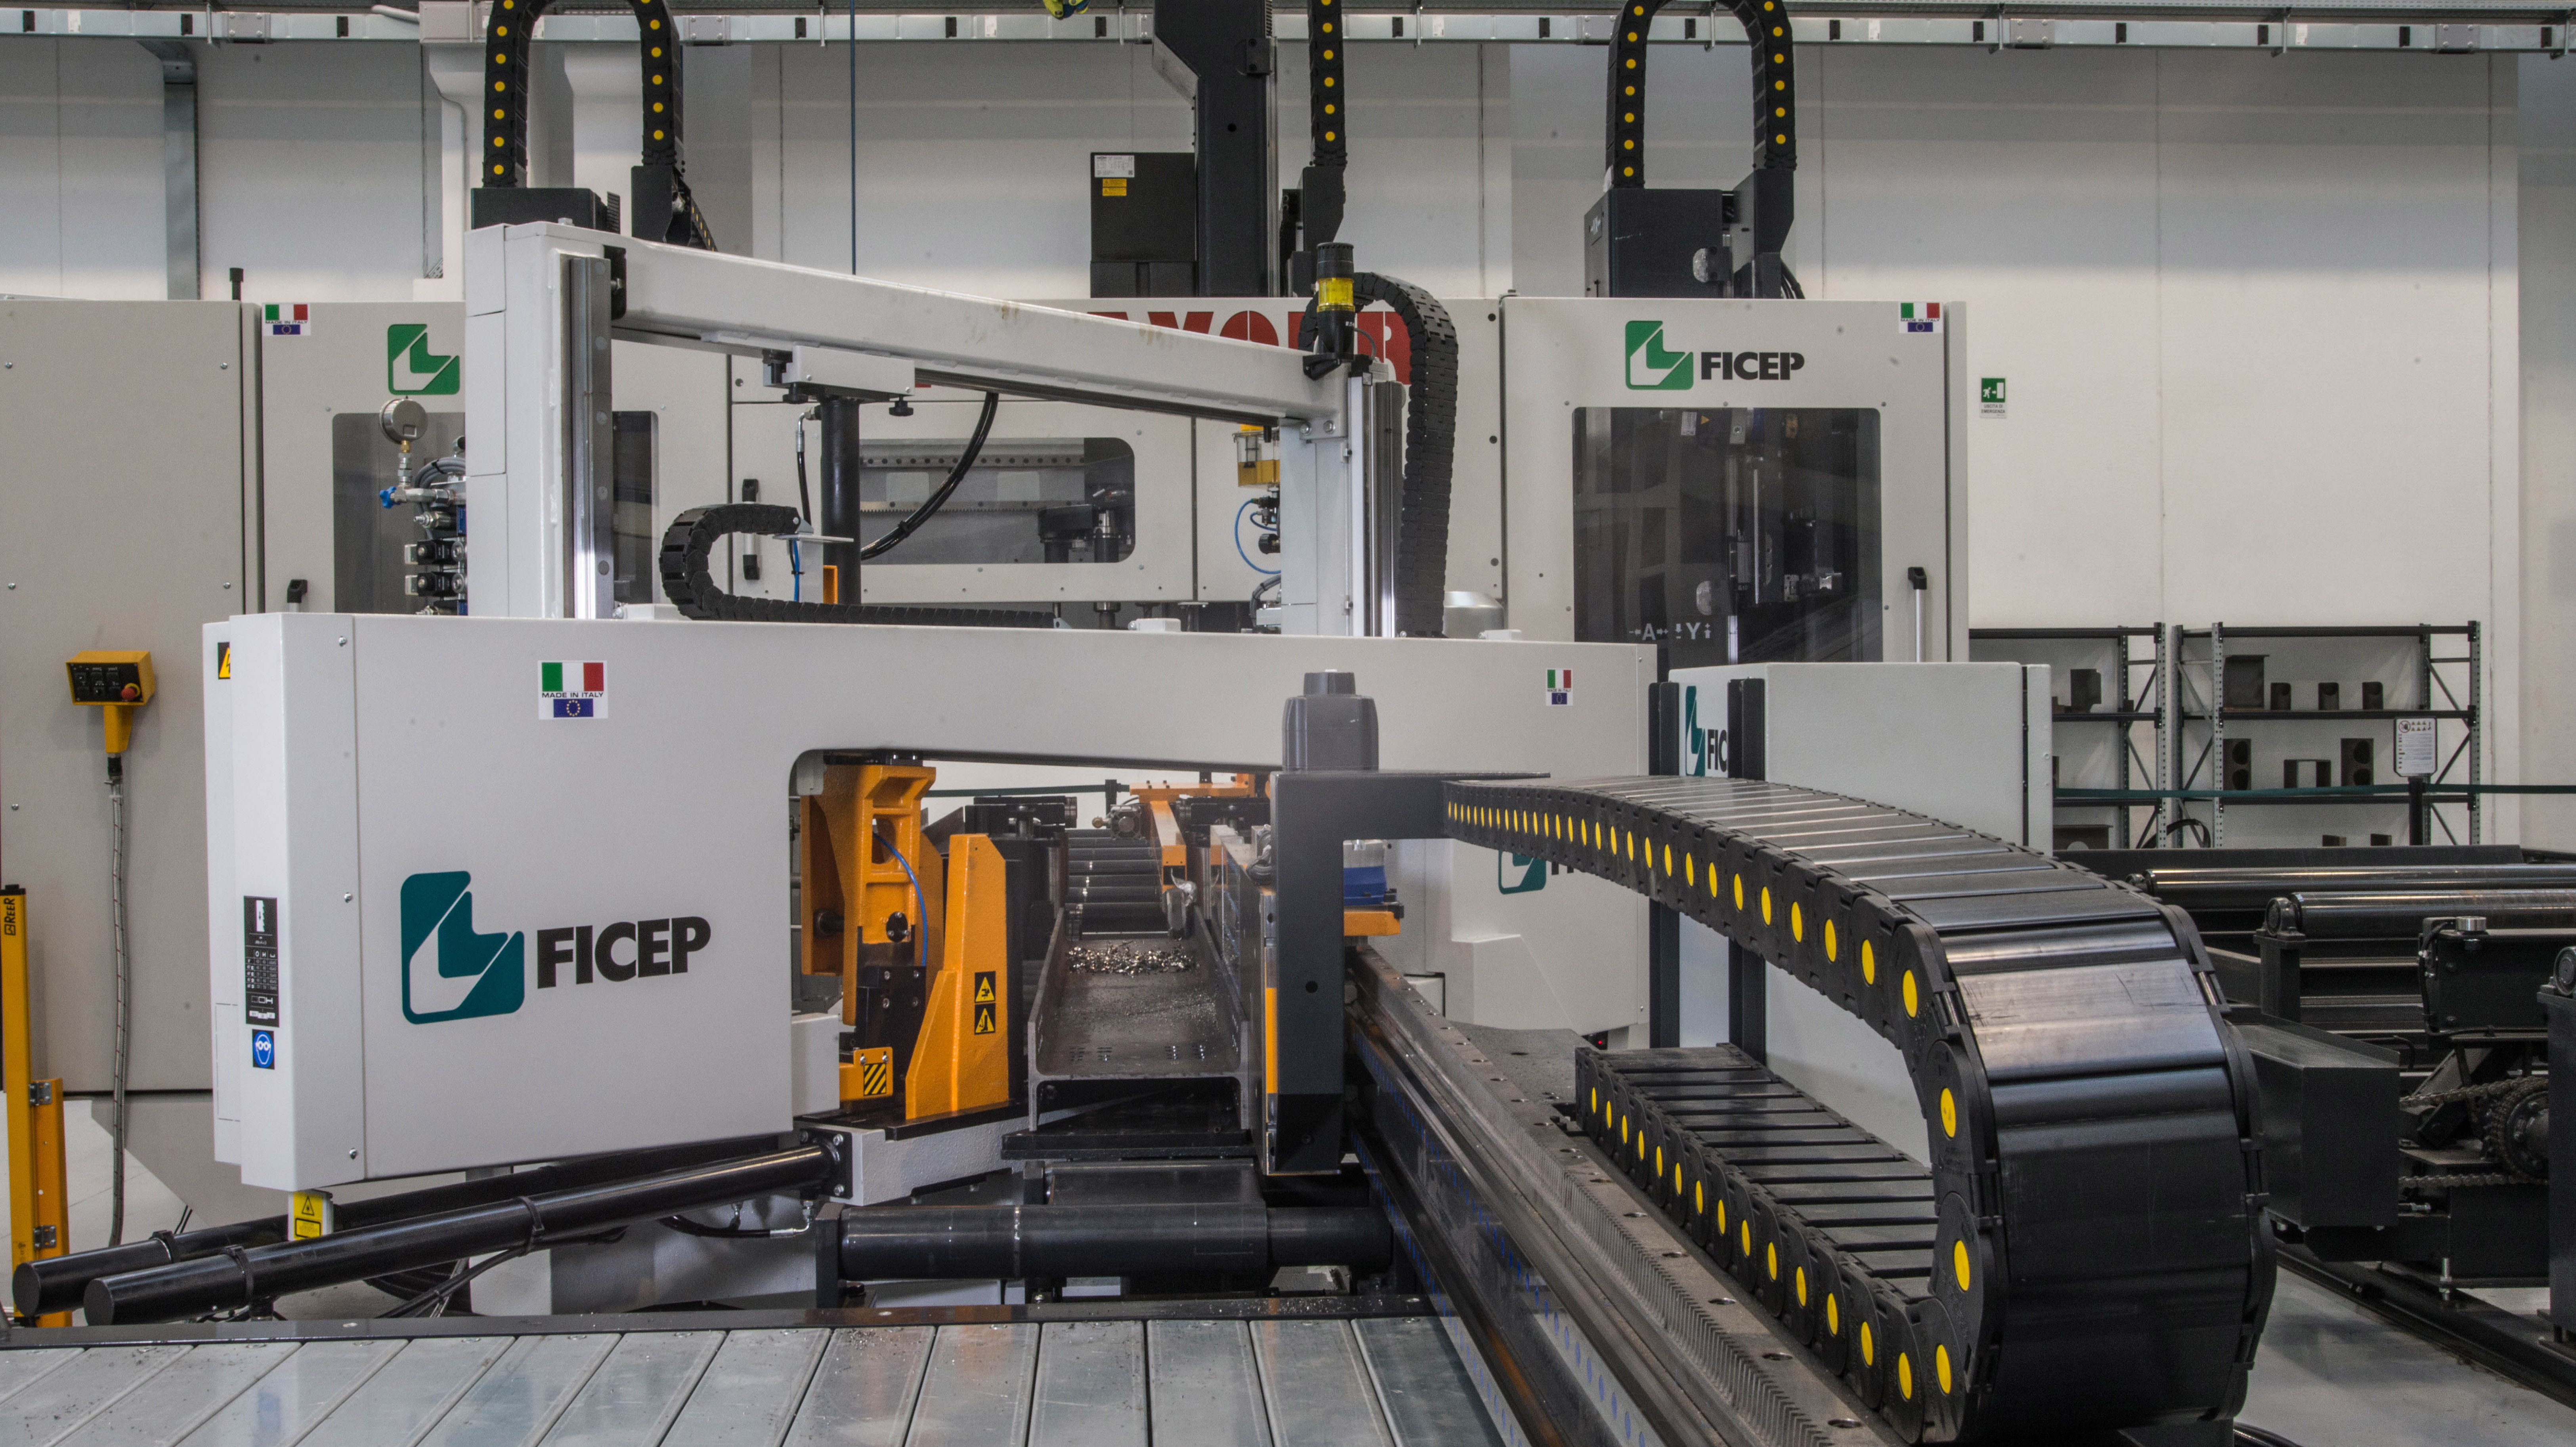 ECS expands fabrication capabilities with new CNC machine (Images credit: Ficep UK Ltd)